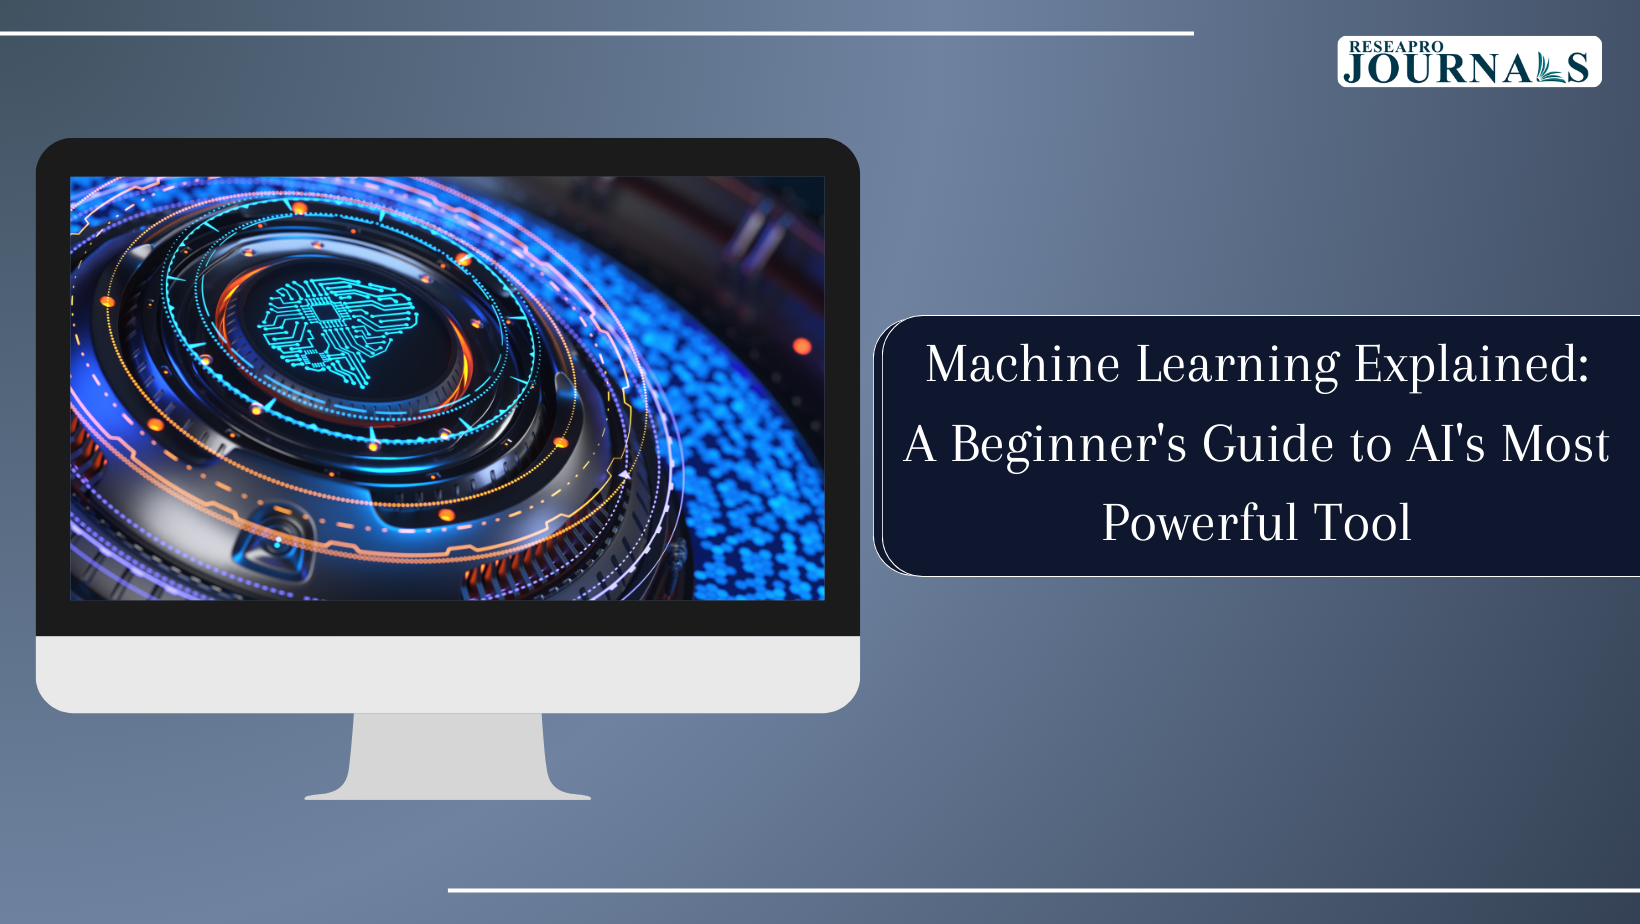 Machine Learning Explained: A Beginner’s Guide to AI’s Most Powerful Tool